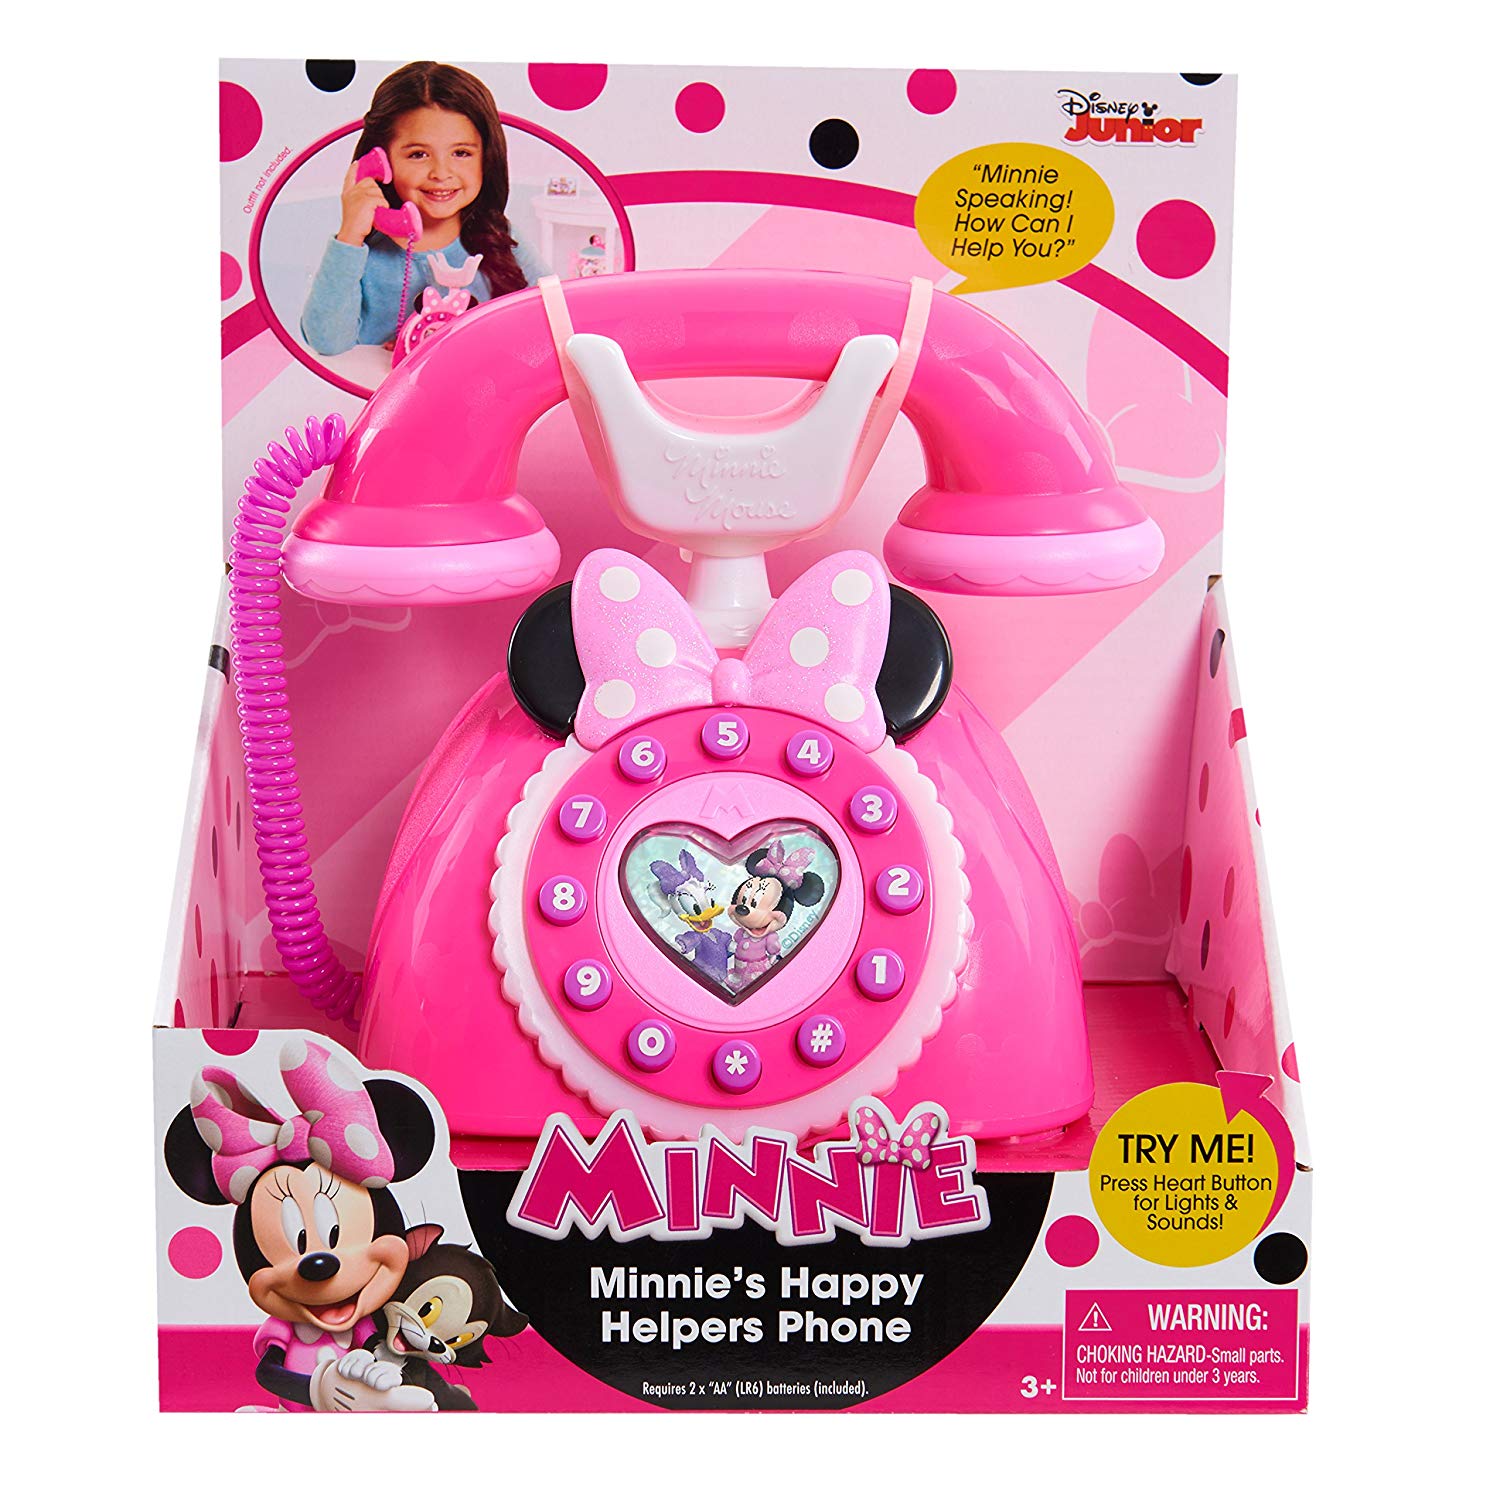 Minnie Happy Helpers Phone Only 7.72 Today! a